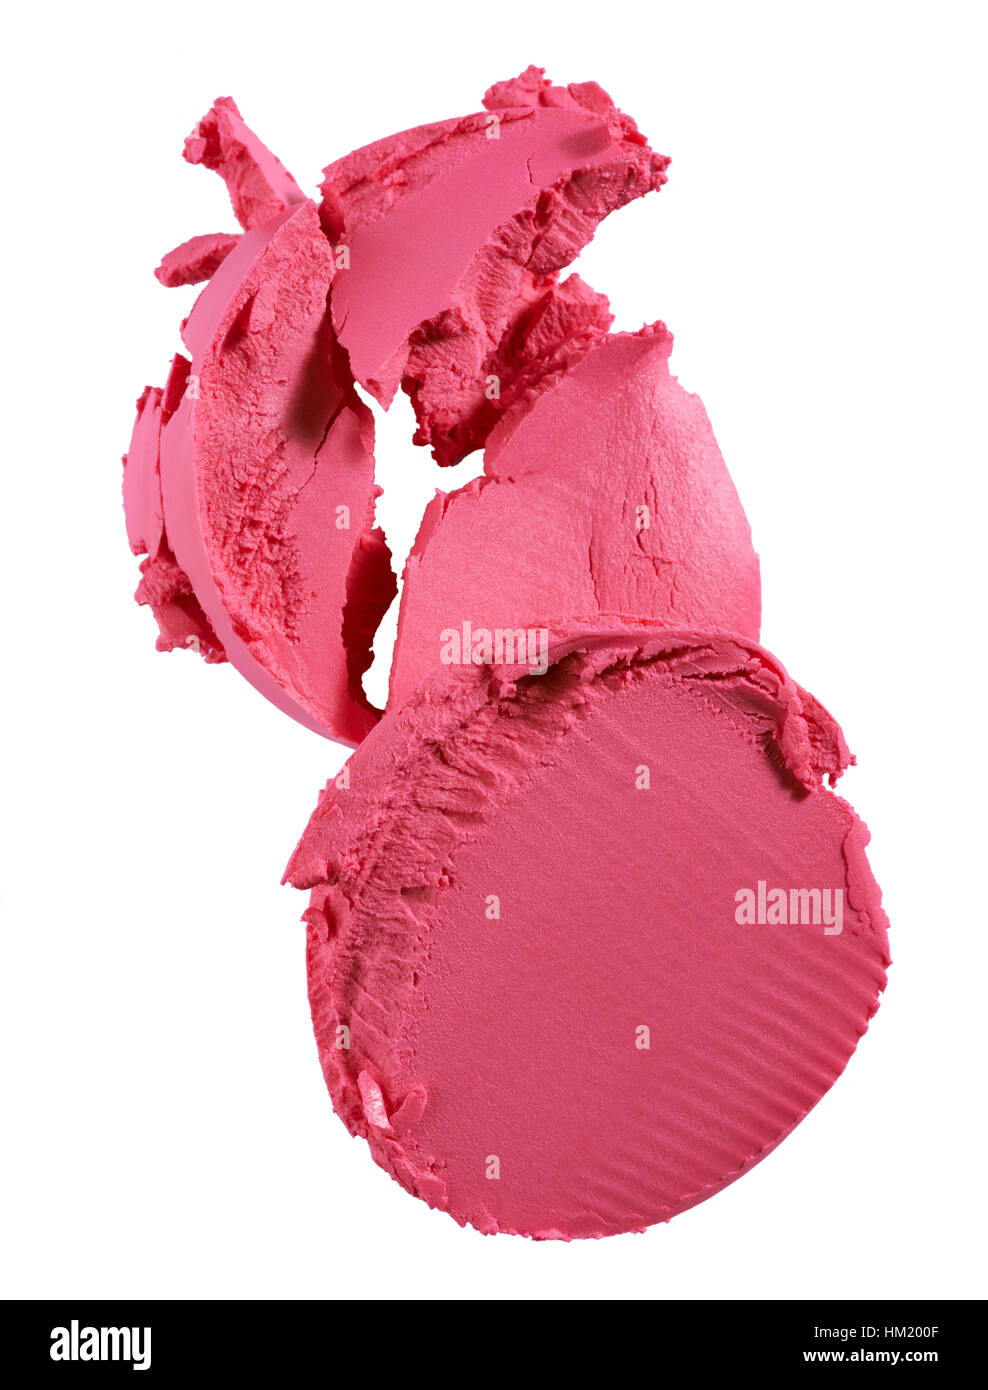 A cut out image of a sample of pink blush or blusher stick. Stock Photo